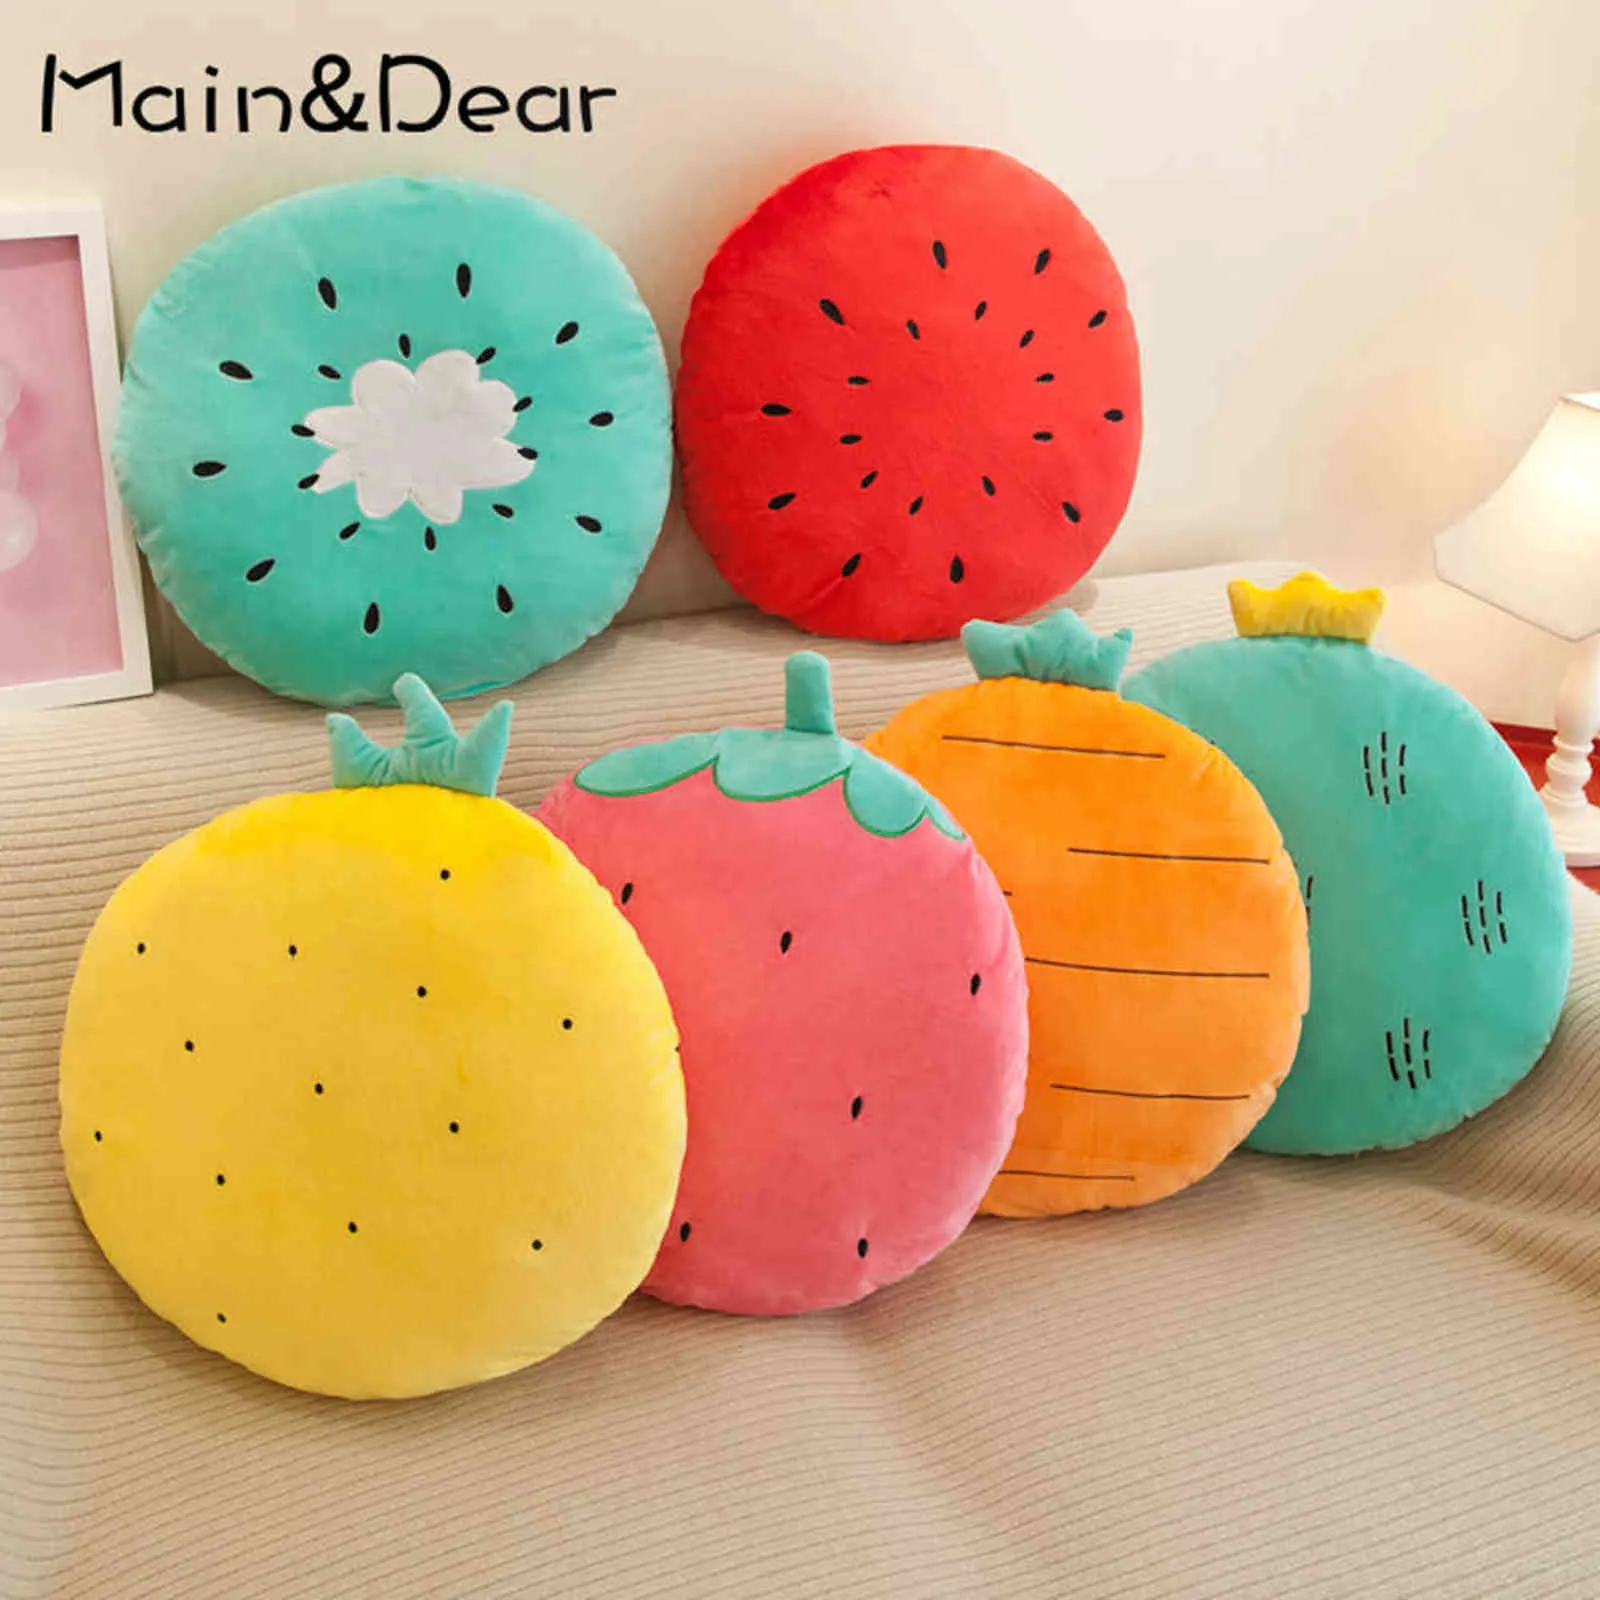 Simulation Fruit Cushion Cotton Office Chair Student Seat Dining Home Decoration For Gifts 211110